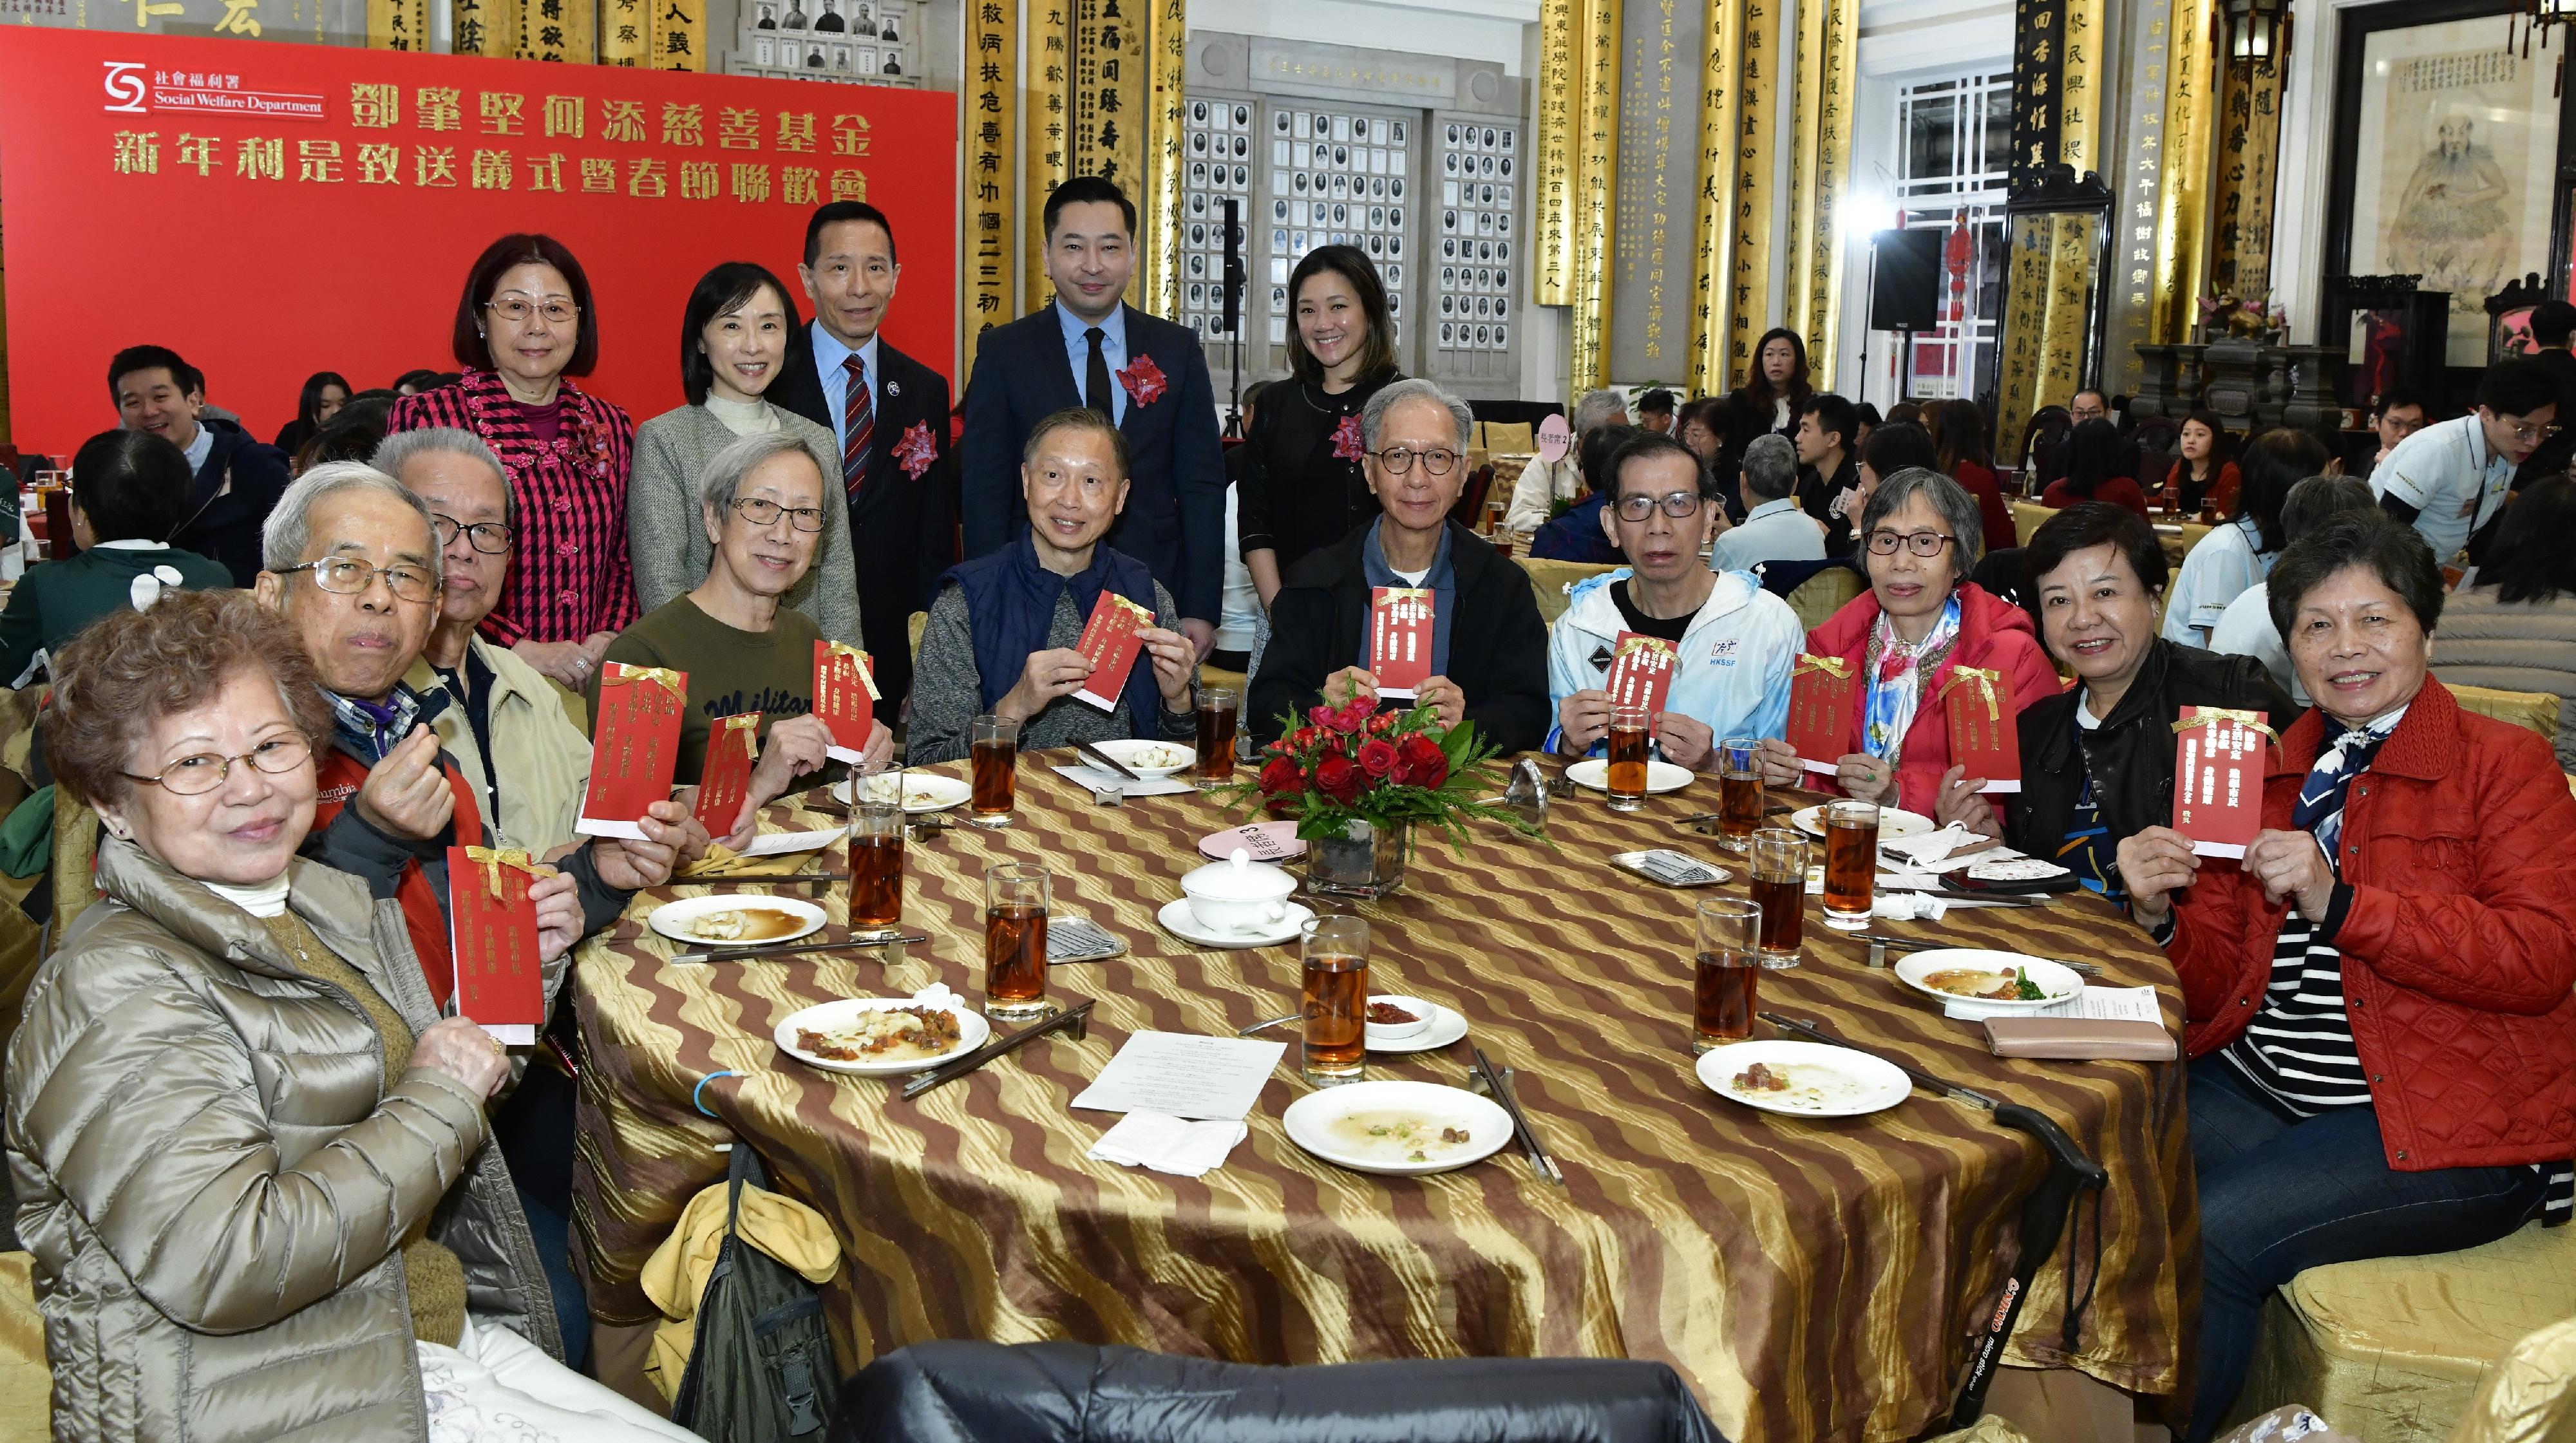 The Social Welfare Department and the Management Committee of the Tang Shiu Kin and Ho Tim Charitable Fund (the Fund) today (January 16) hosted a spring reception for the elderly and presented lai see packets to them in celebration of the upcoming Lunar New Year. Photo shows the Director of Social Welfare, Miss Charmaine Lee (back row, second left), together with descendants of the Fund's founders, Mr Richard Tang (back row, third left) and Miss Veronica Ho (back row, first right); the Chairman of the Tung Wah Group of Hospitals, Mr Herman Wai (back row, second right); and the Chairman of Po Leung Kuk, Mrs Winnie Chan (back row, first left), greeting elderly participants with lai see packets in celebration of the coming Lunar New Year.